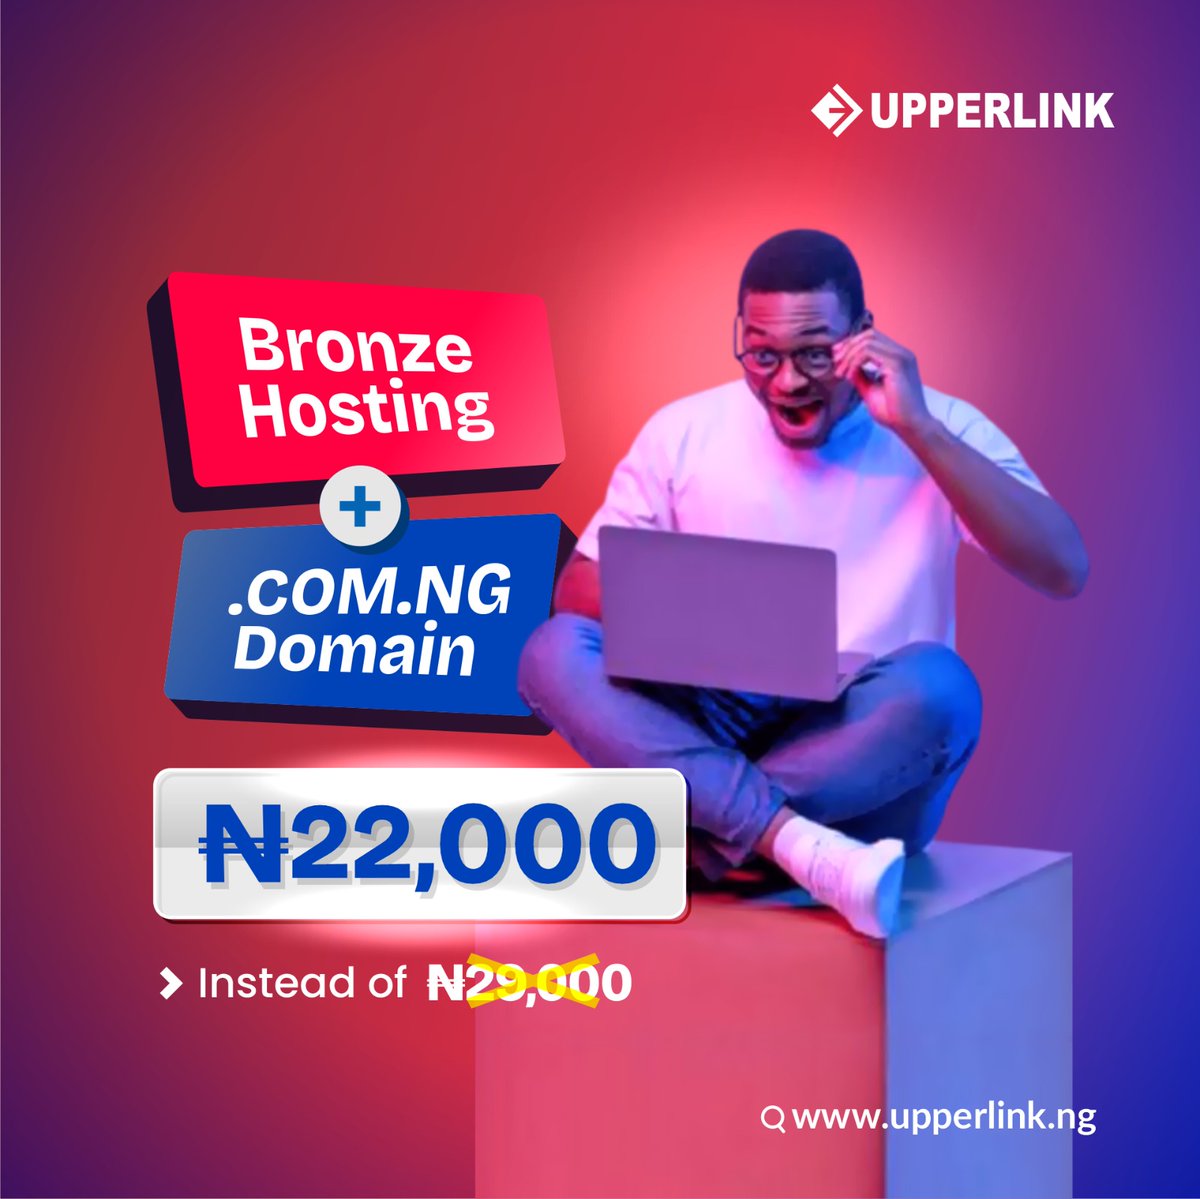 Elevate your web game with our exclusive deals! 🚀 Snag our Bronze Hosting + .ng domain for N22,000 or Basic Hosting + .com.ng for N15,000! 🔥 Don't miss out!
 #webdevelopment #SavingsSquad #OnlineDomination #domainregistration #upperlinklimited #exploremore #explorepage